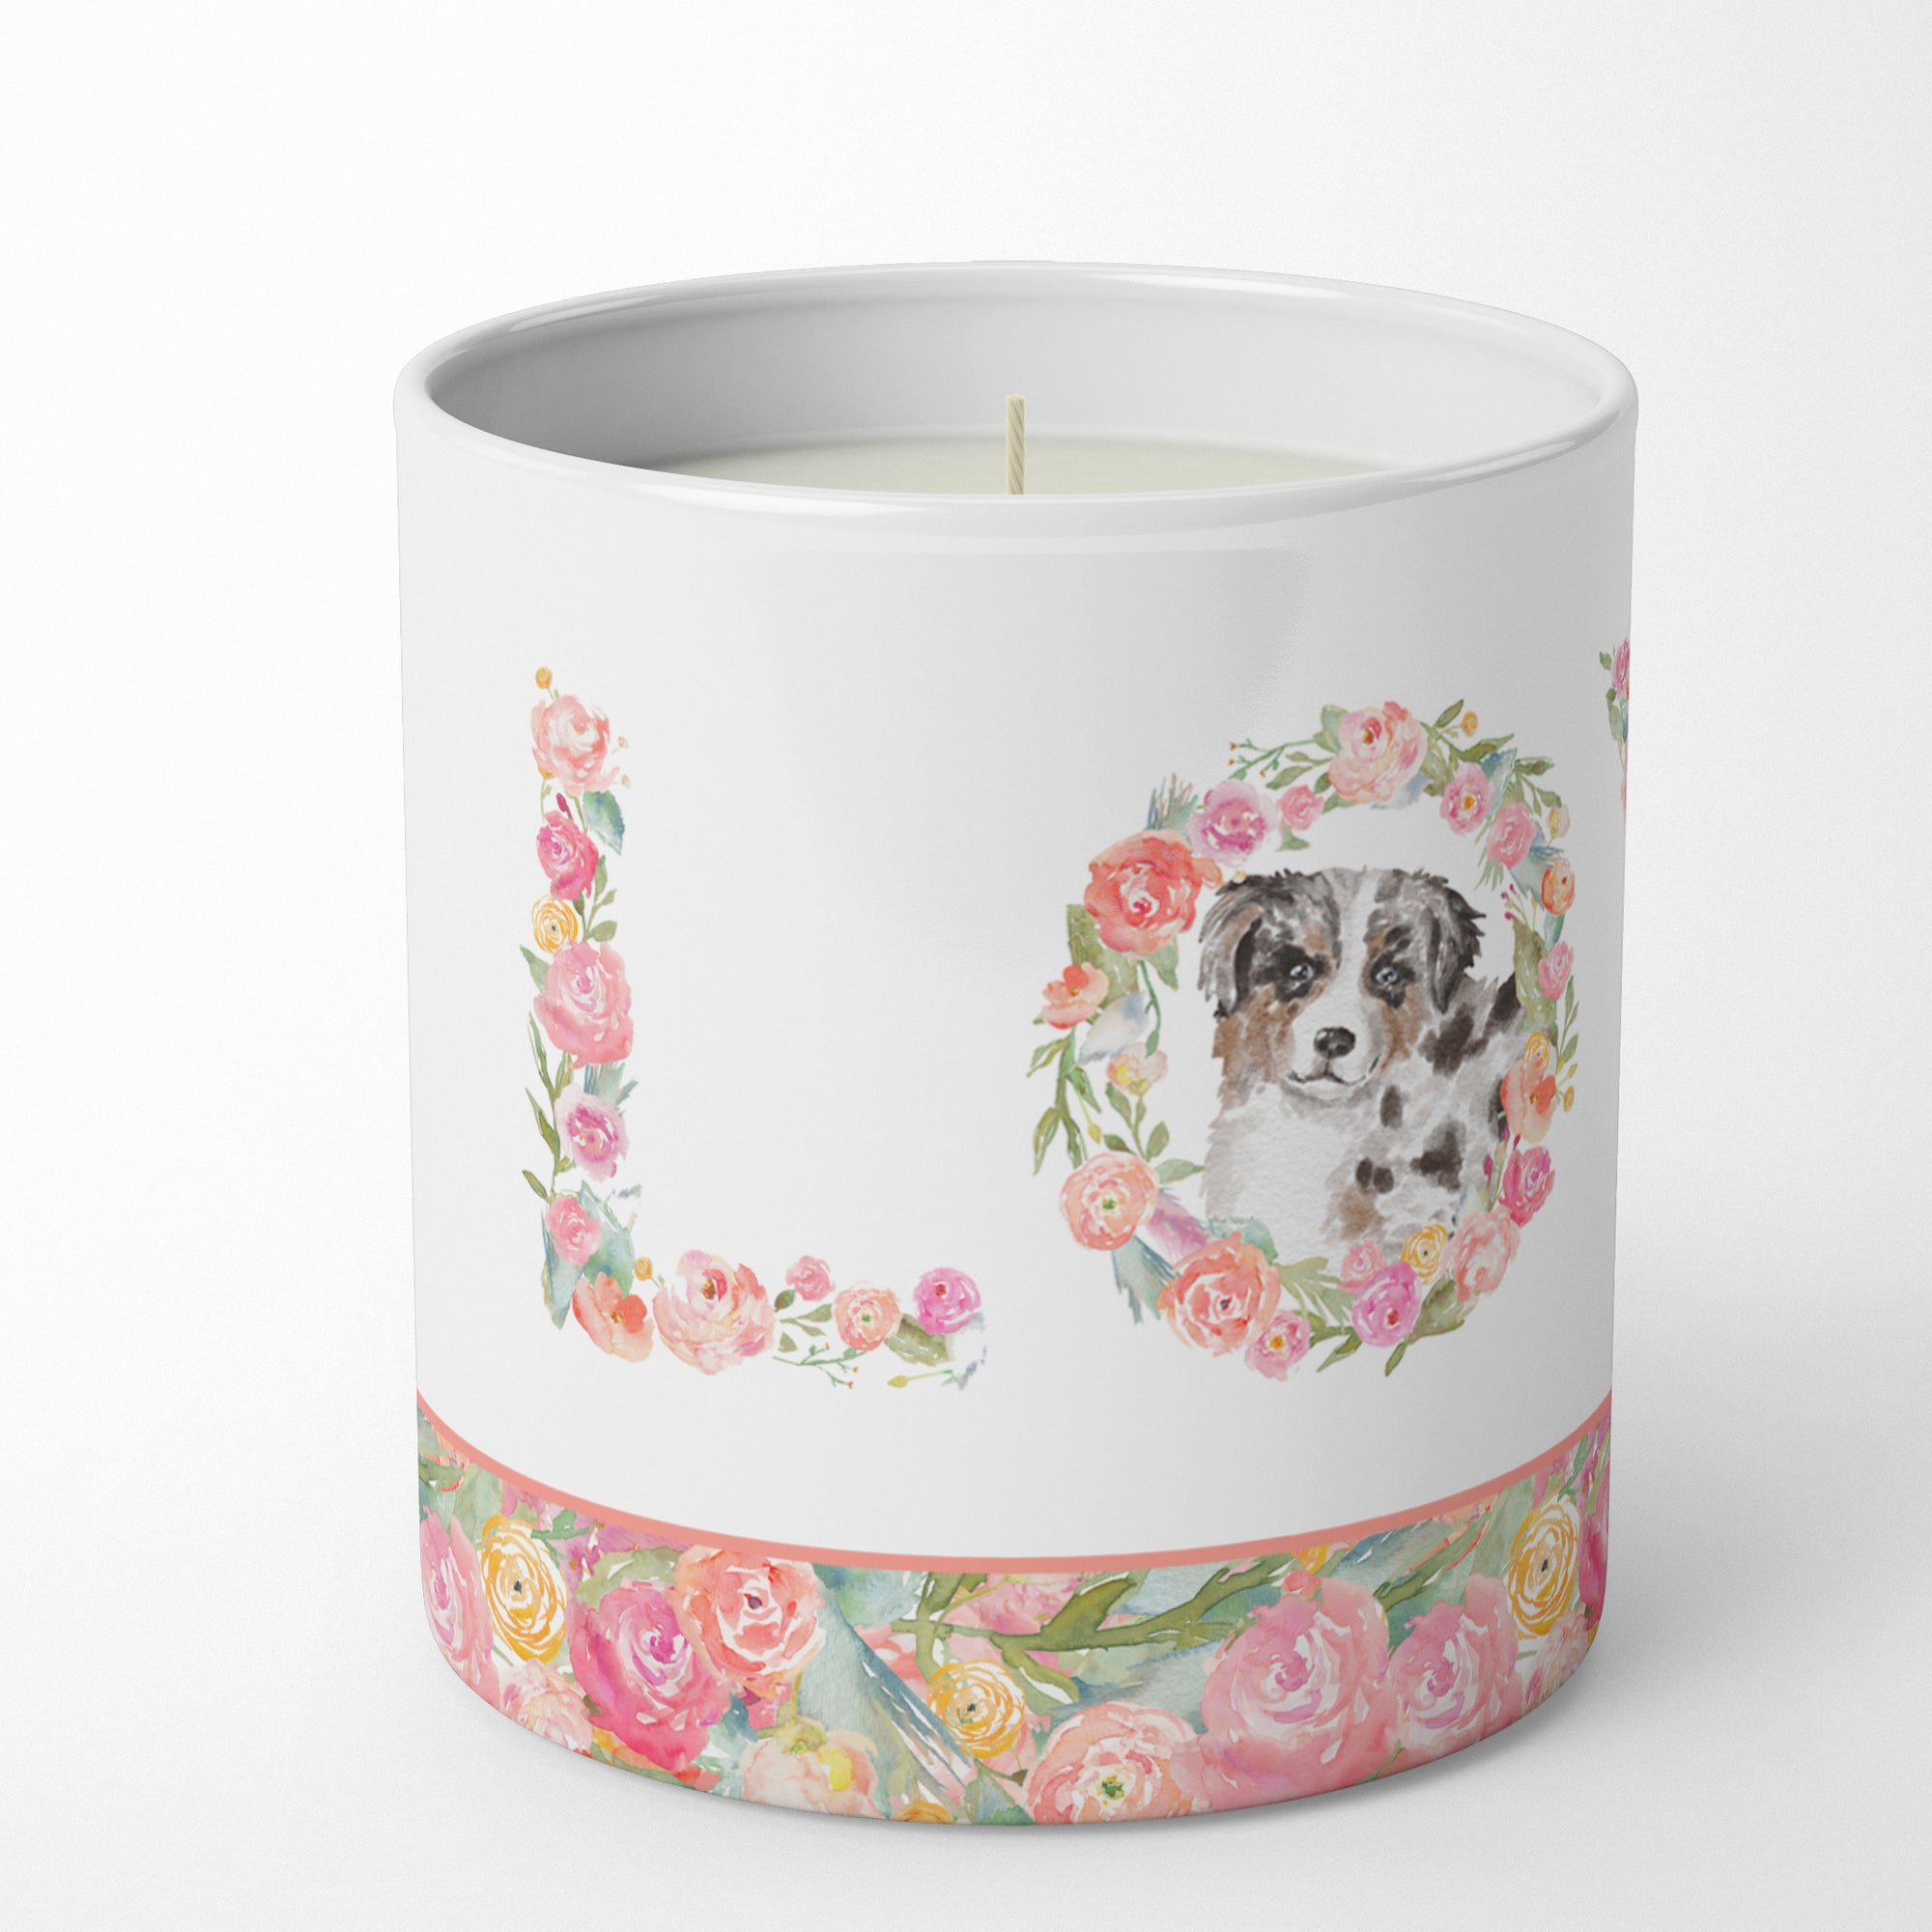 Buy this Australian Shepherd Blue Merle Puppy LOVE 10 oz Decorative Soy Candle